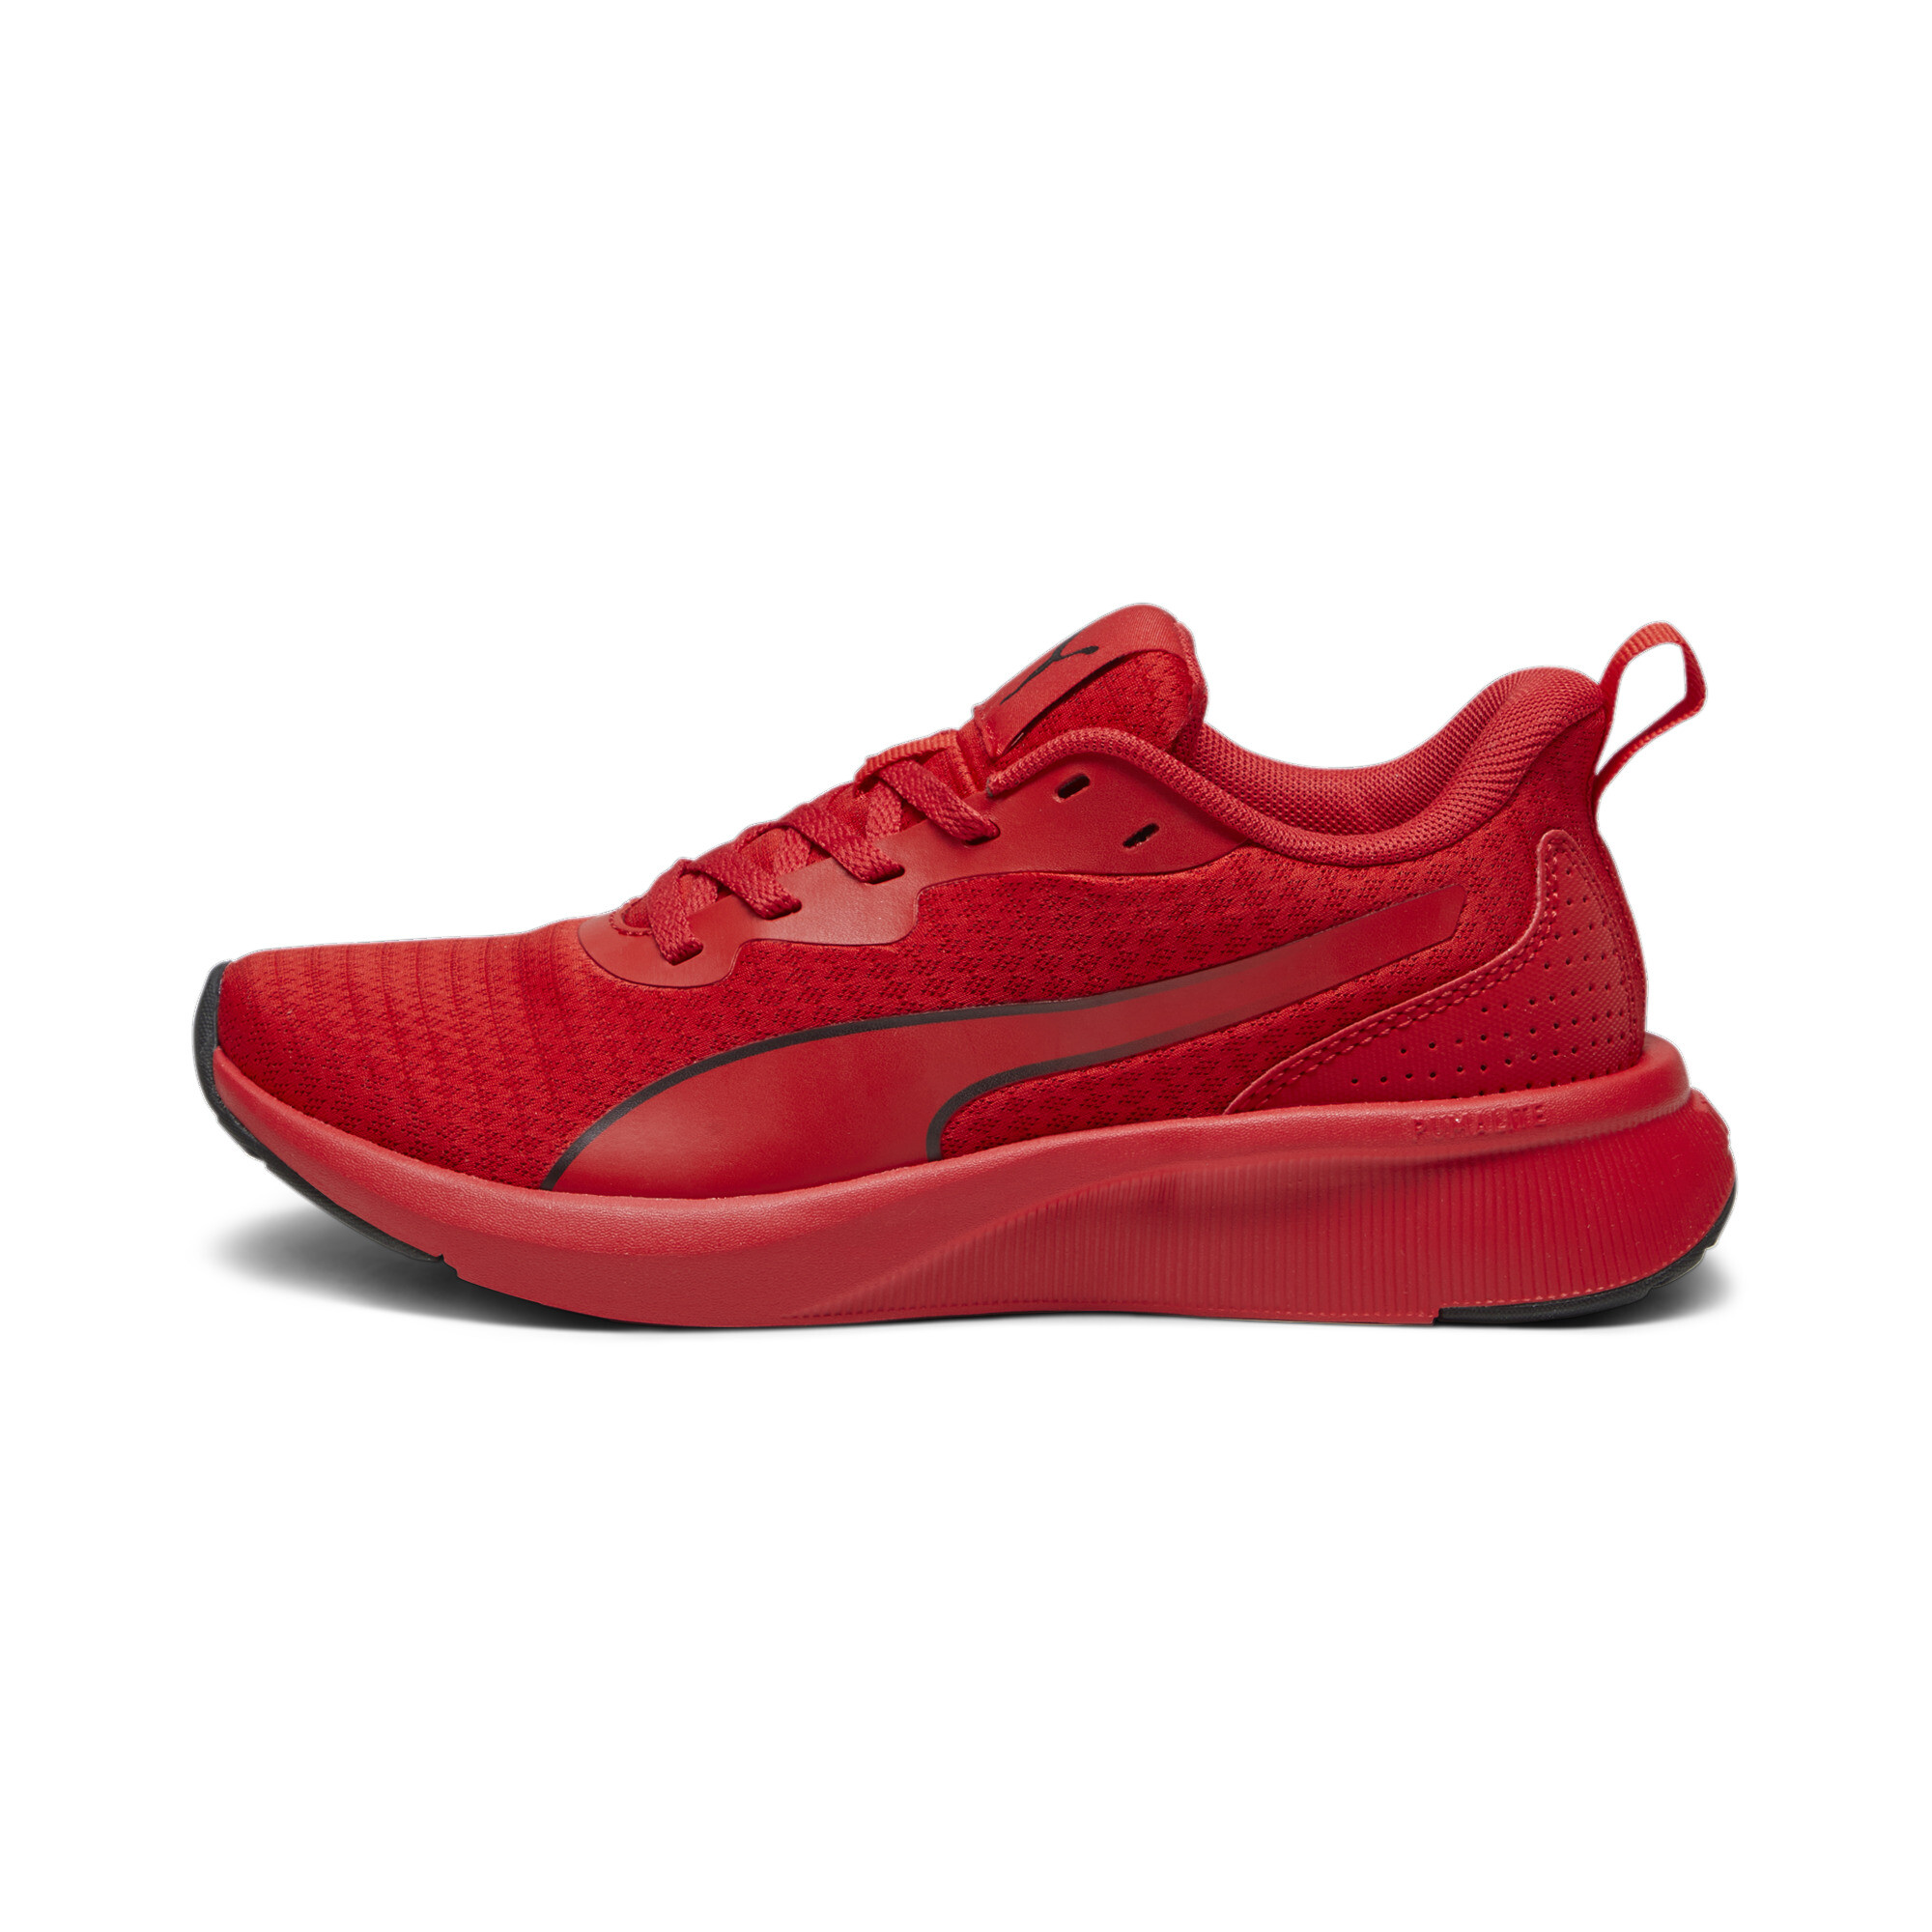 Puma Flyer Lite Youth Sneakers, Red, Size 37, Shoes